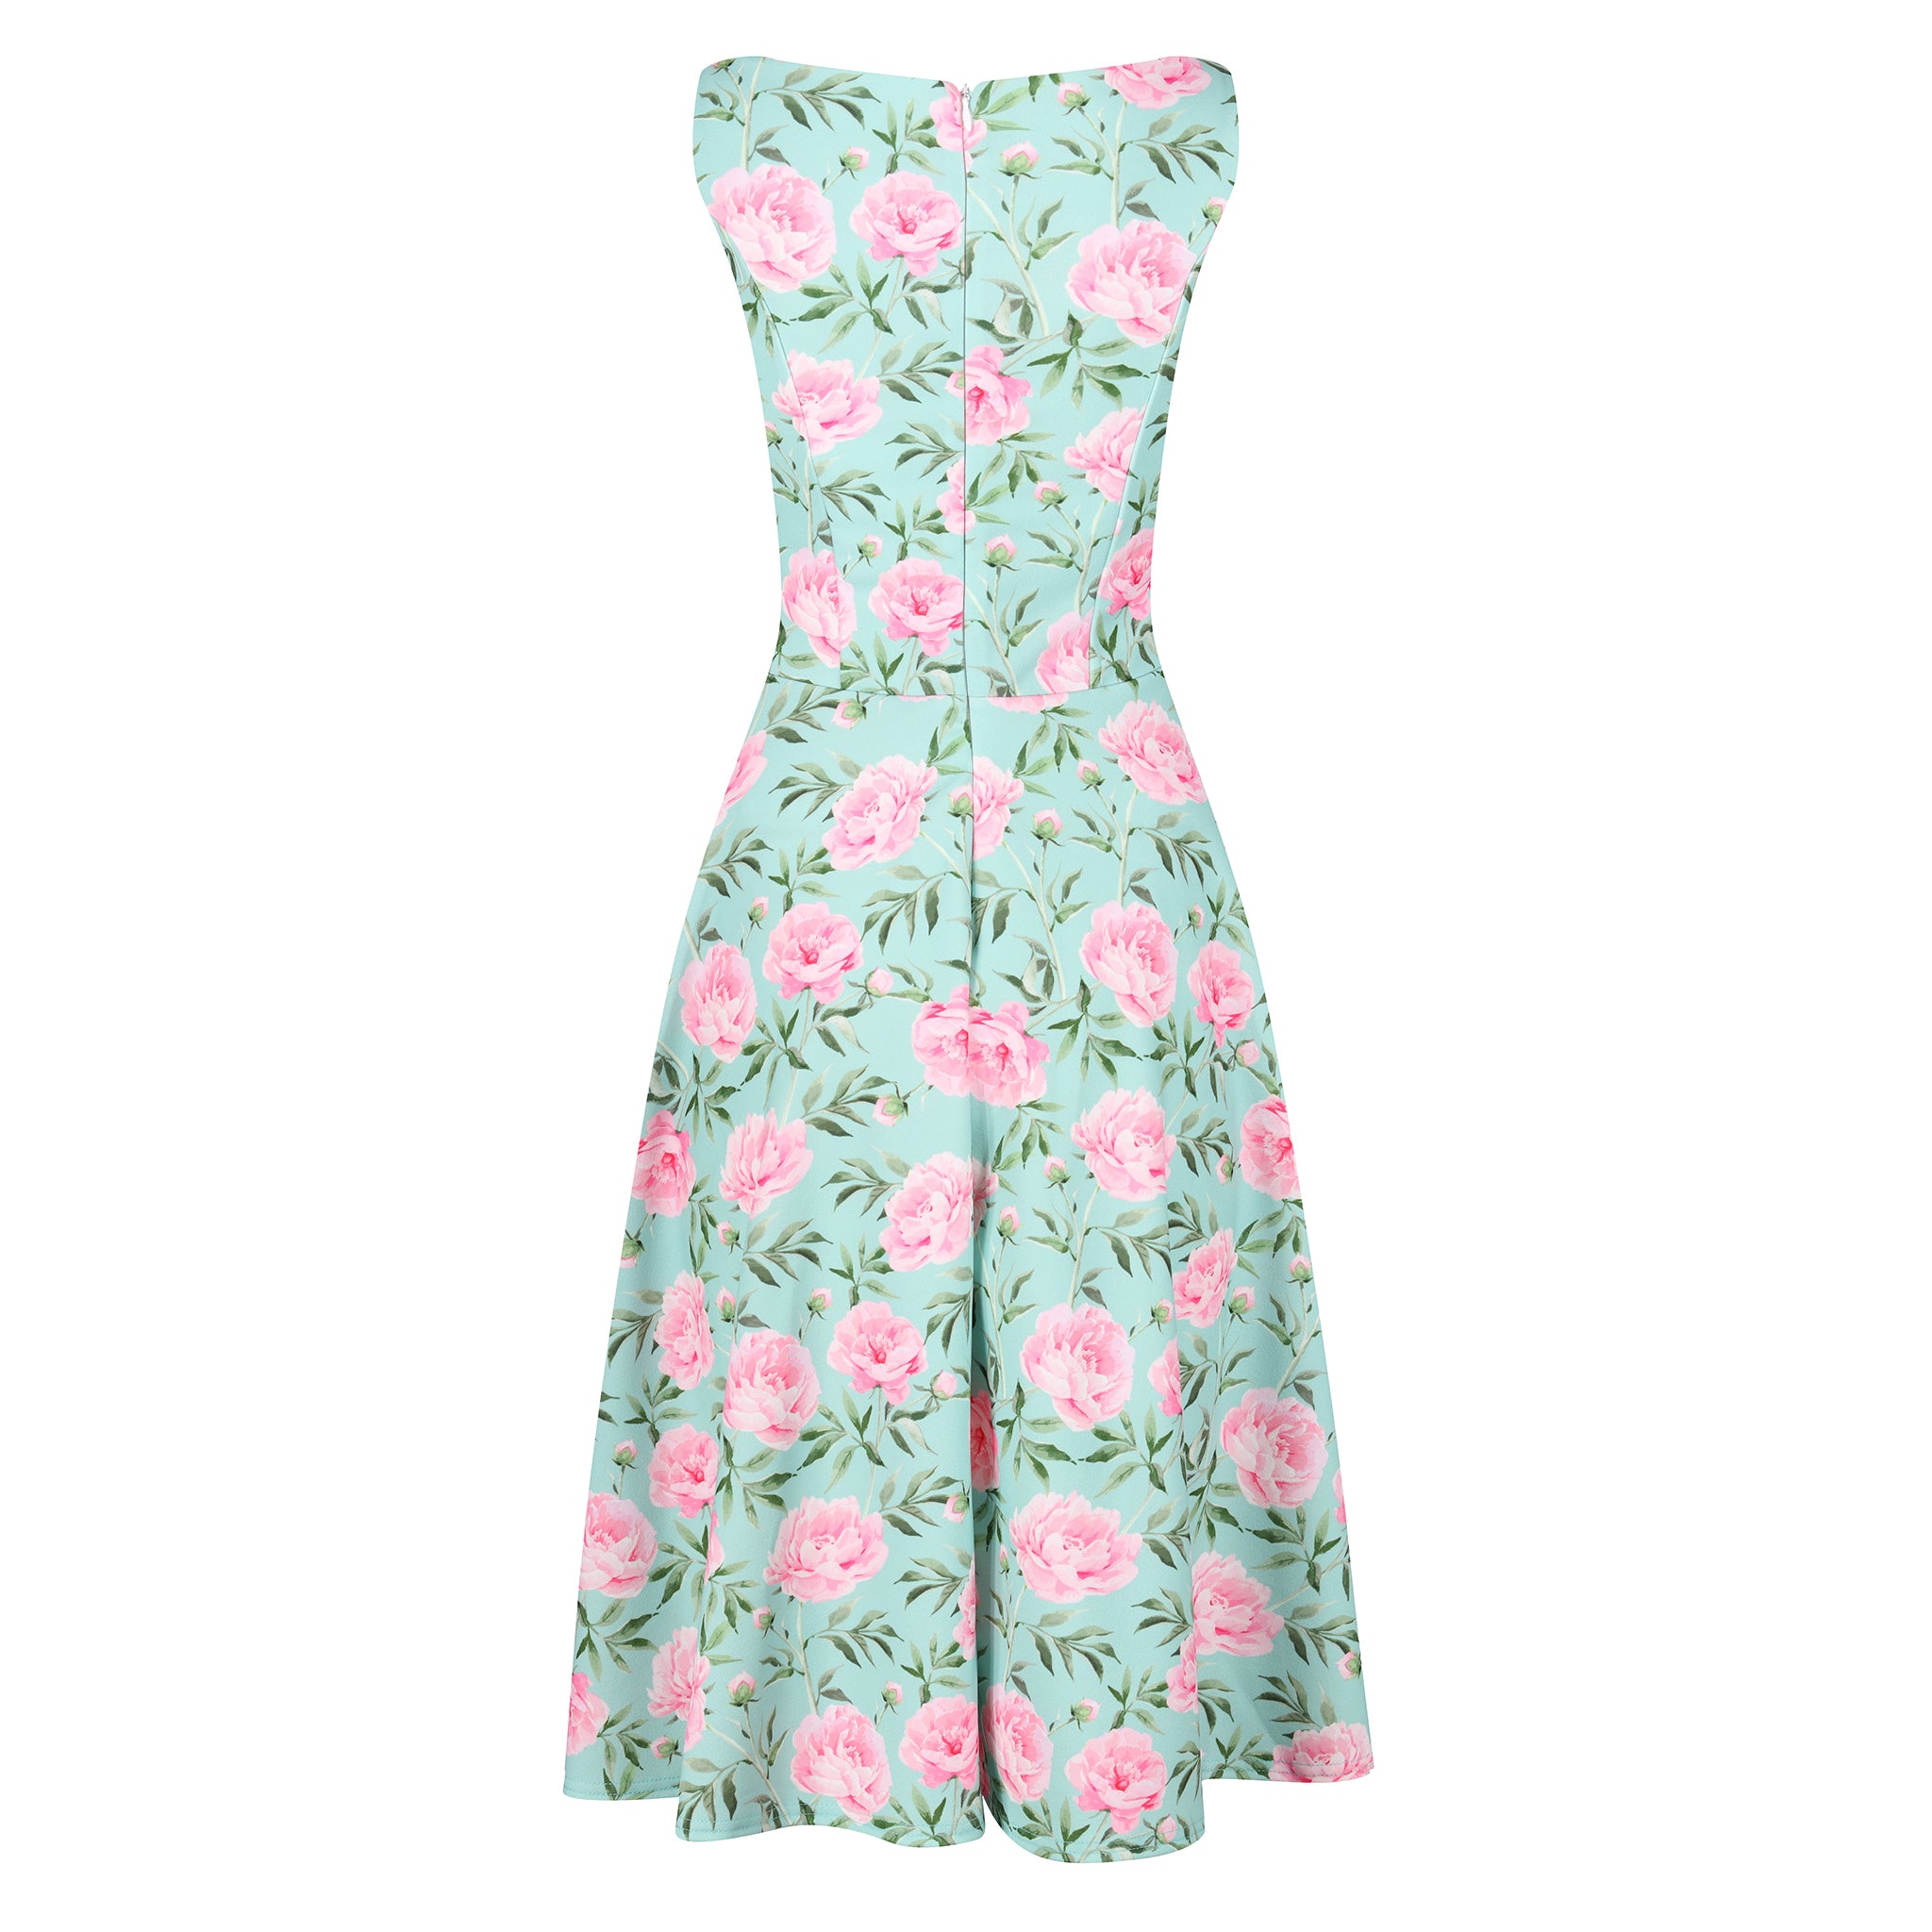 Mint Green And Pink Floral Print Audrey Style 1950s Swing Dress